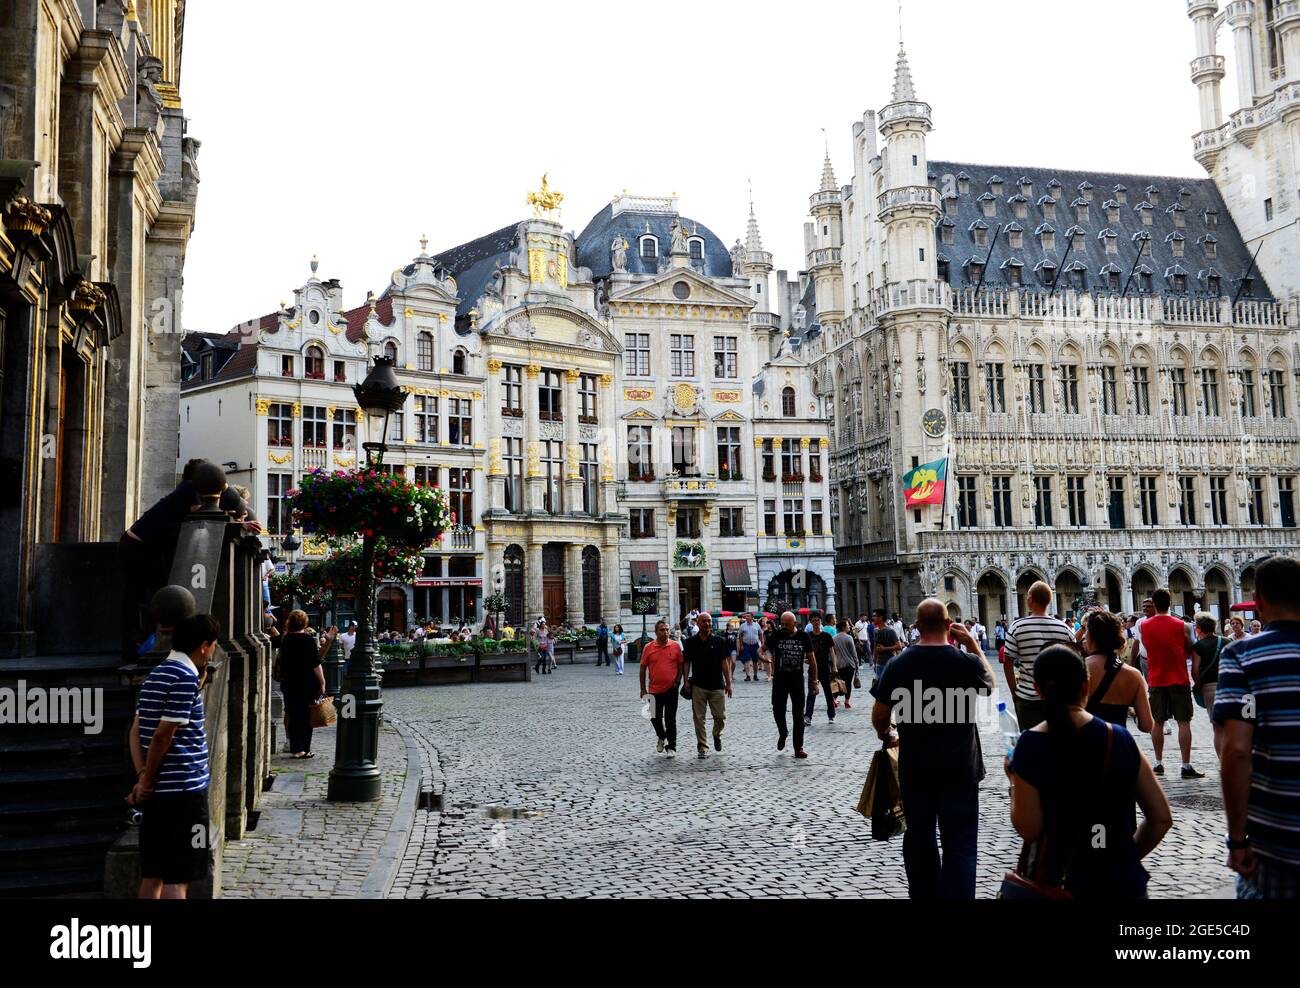 A view of the Grand Place from Rue de la Colline in Brussels, Belgium. Stock Photo